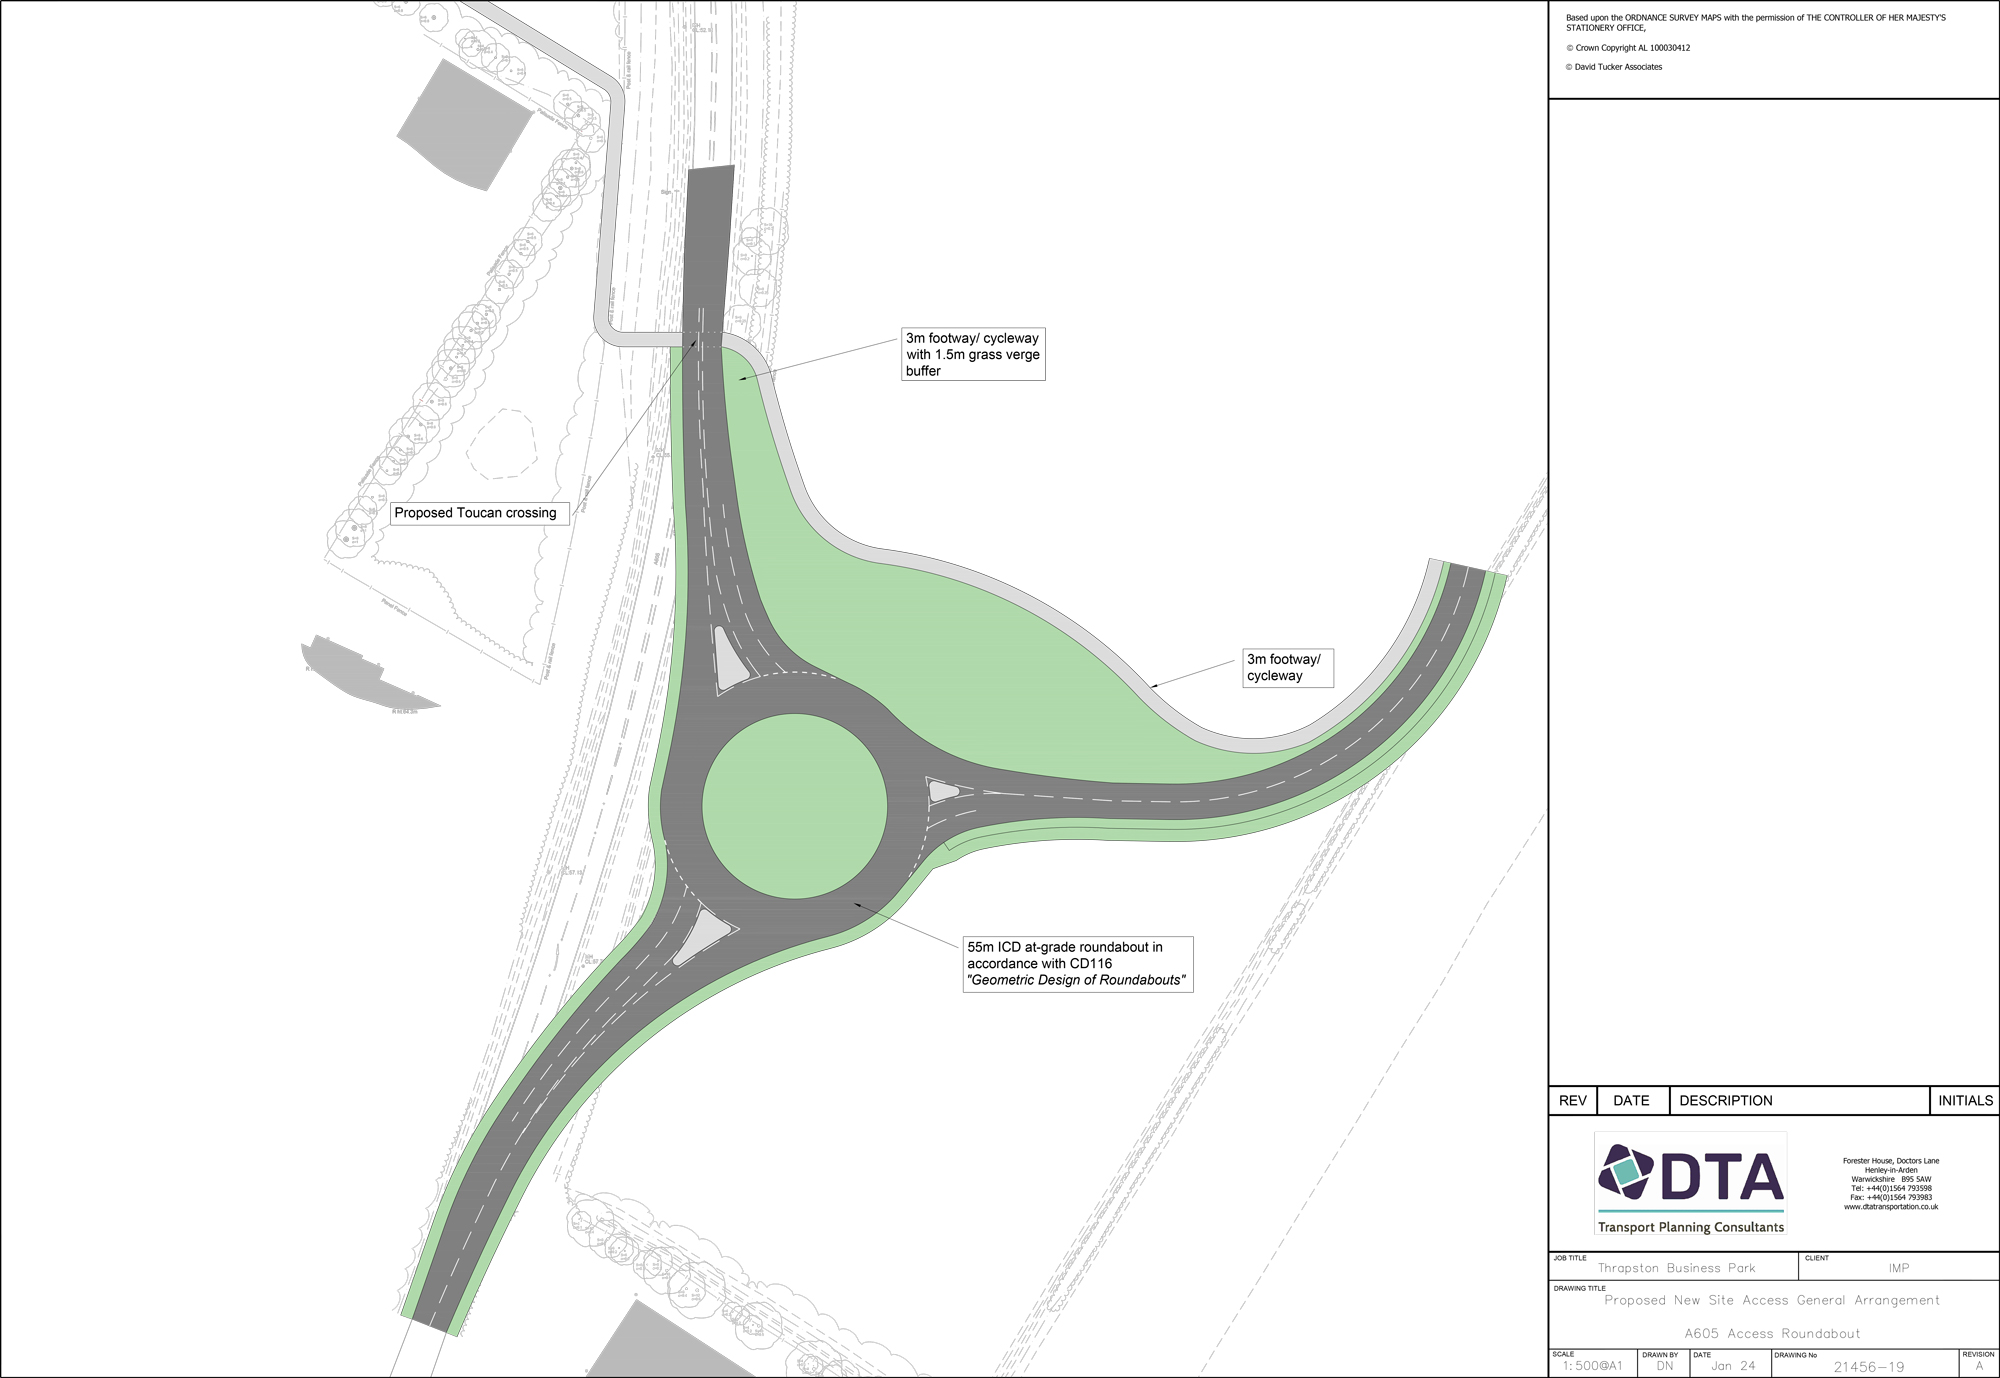 Proposed design of new site access roundabout on A605